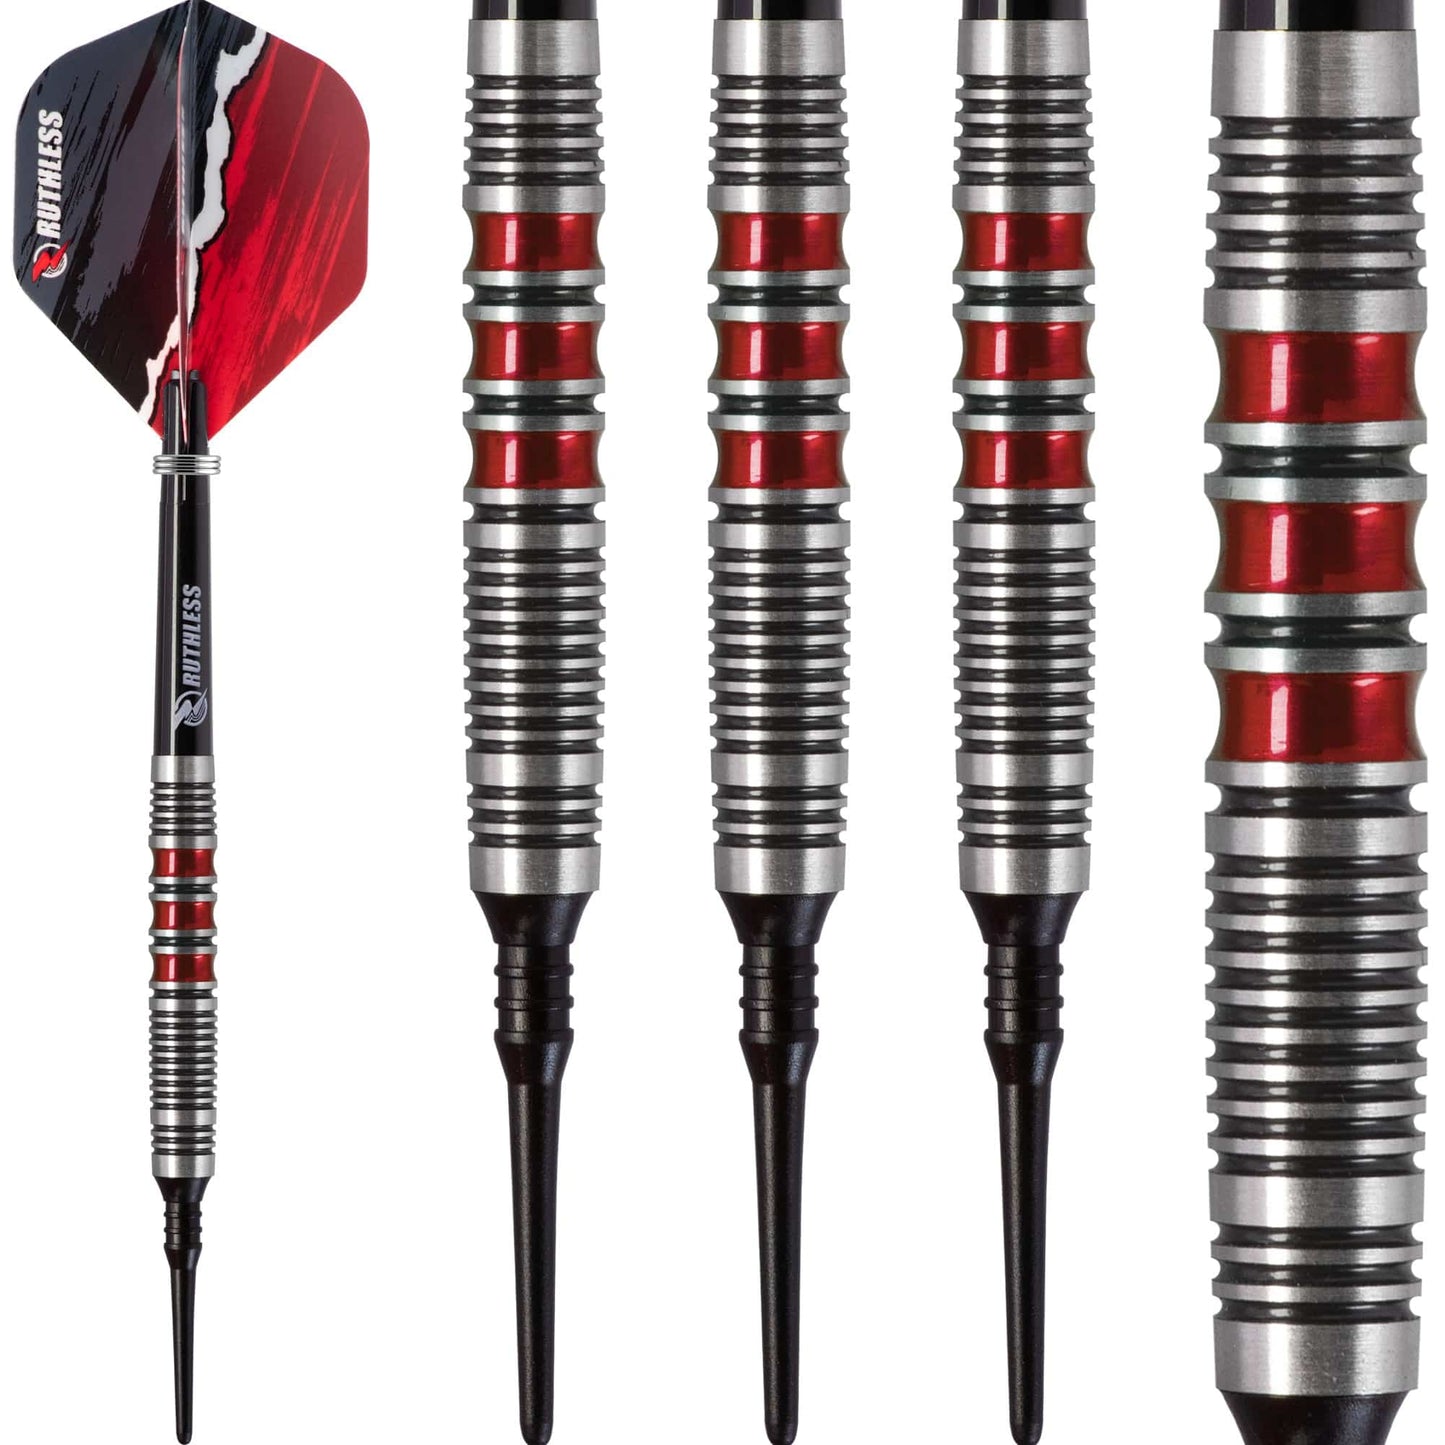 Ruthless Red Falcon Darts - Soft Tip Tungsten - BW 16.0g - Red - 18g 18g